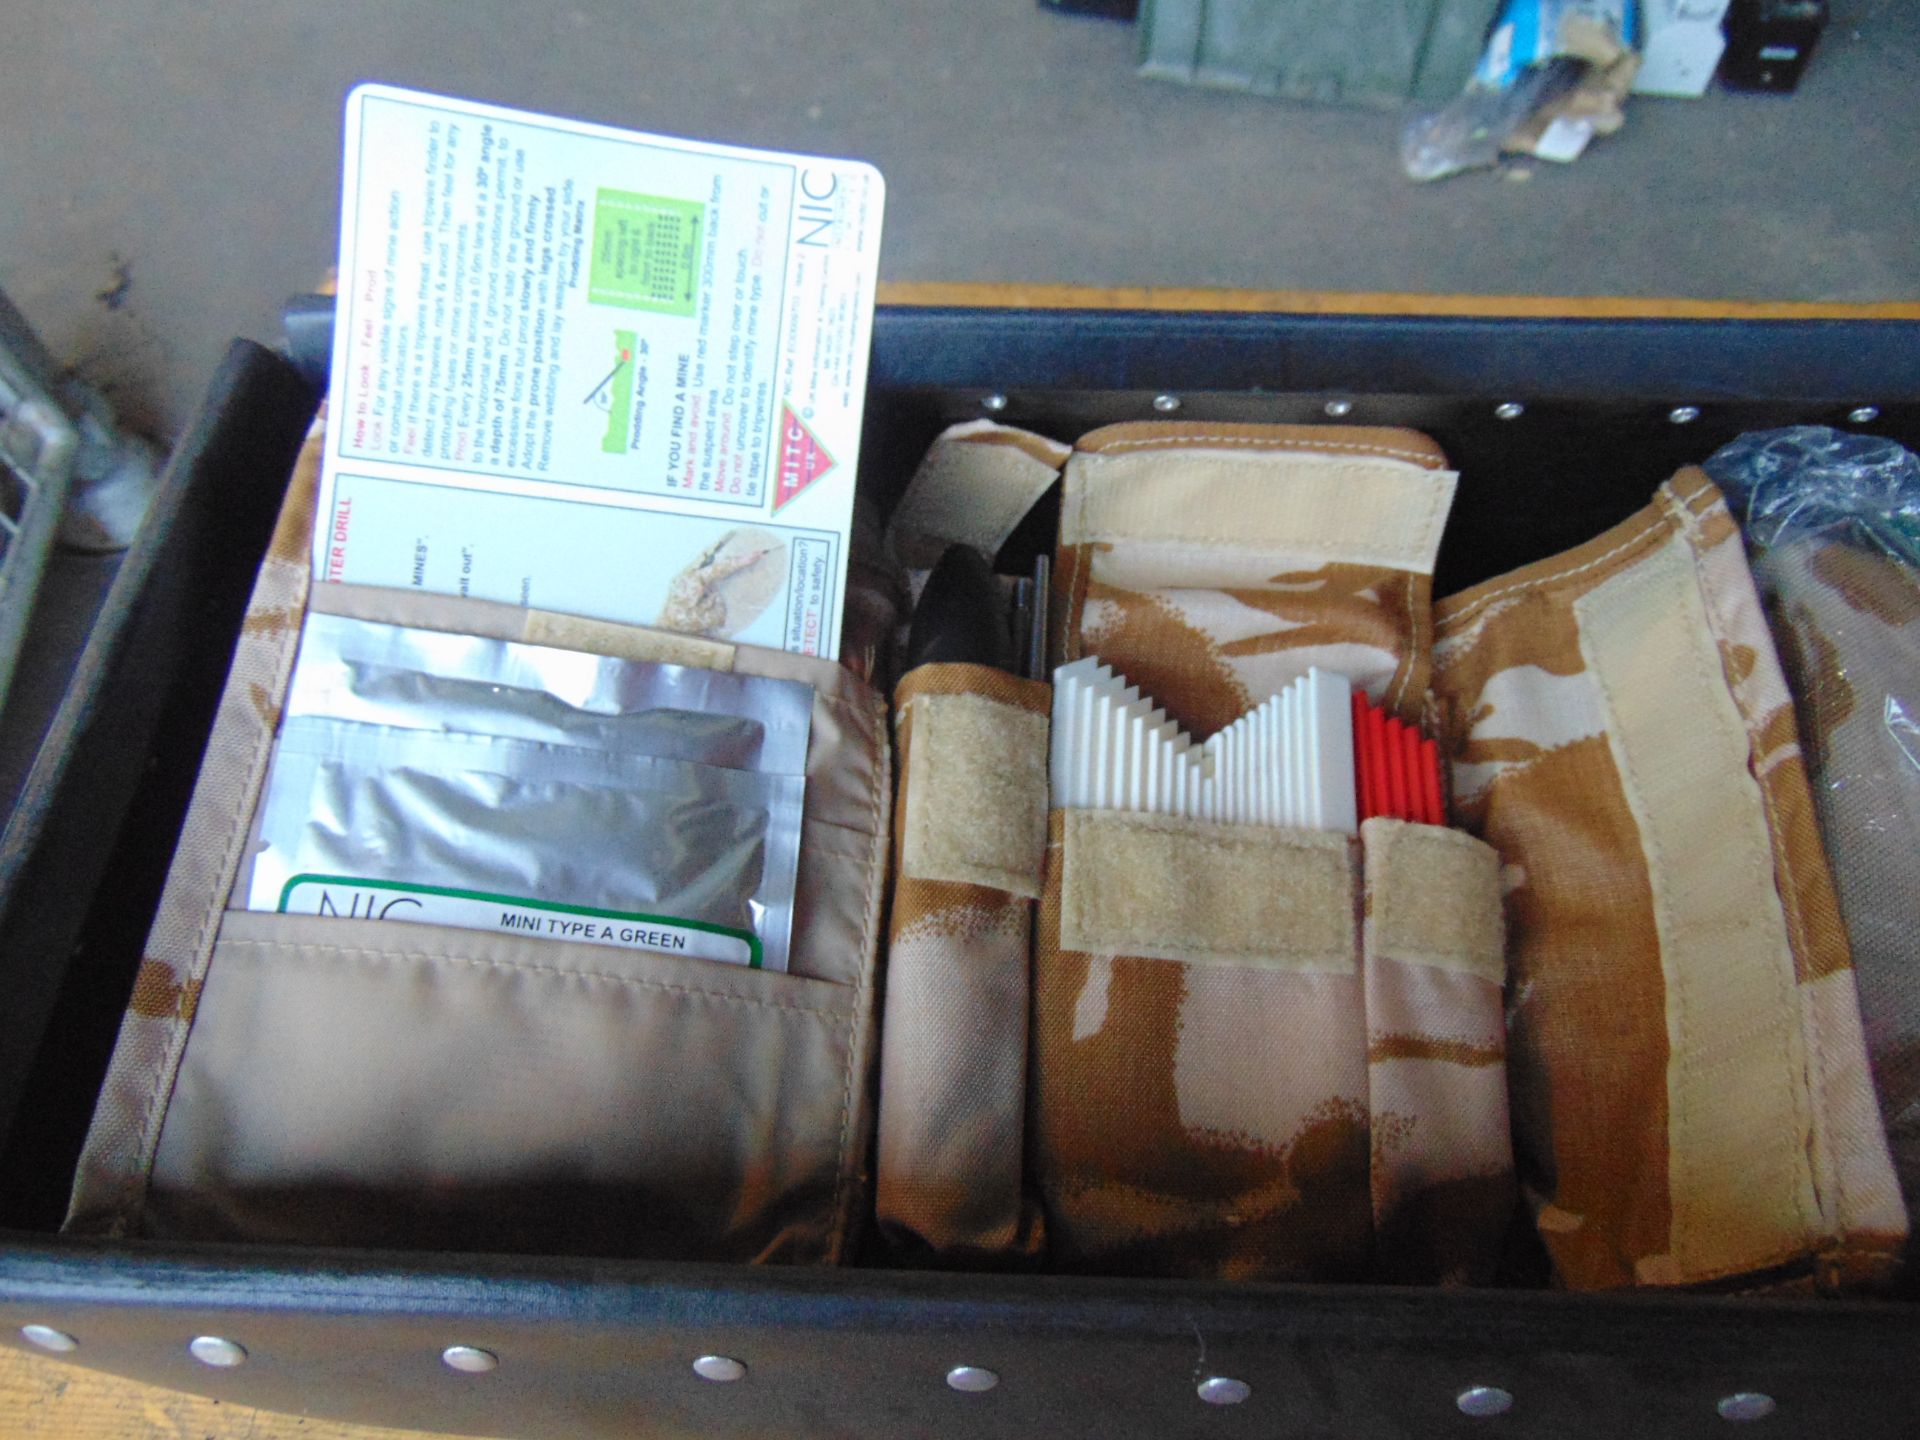 7 x Personal Mine Extraction Kits in Packs - Image 3 of 4